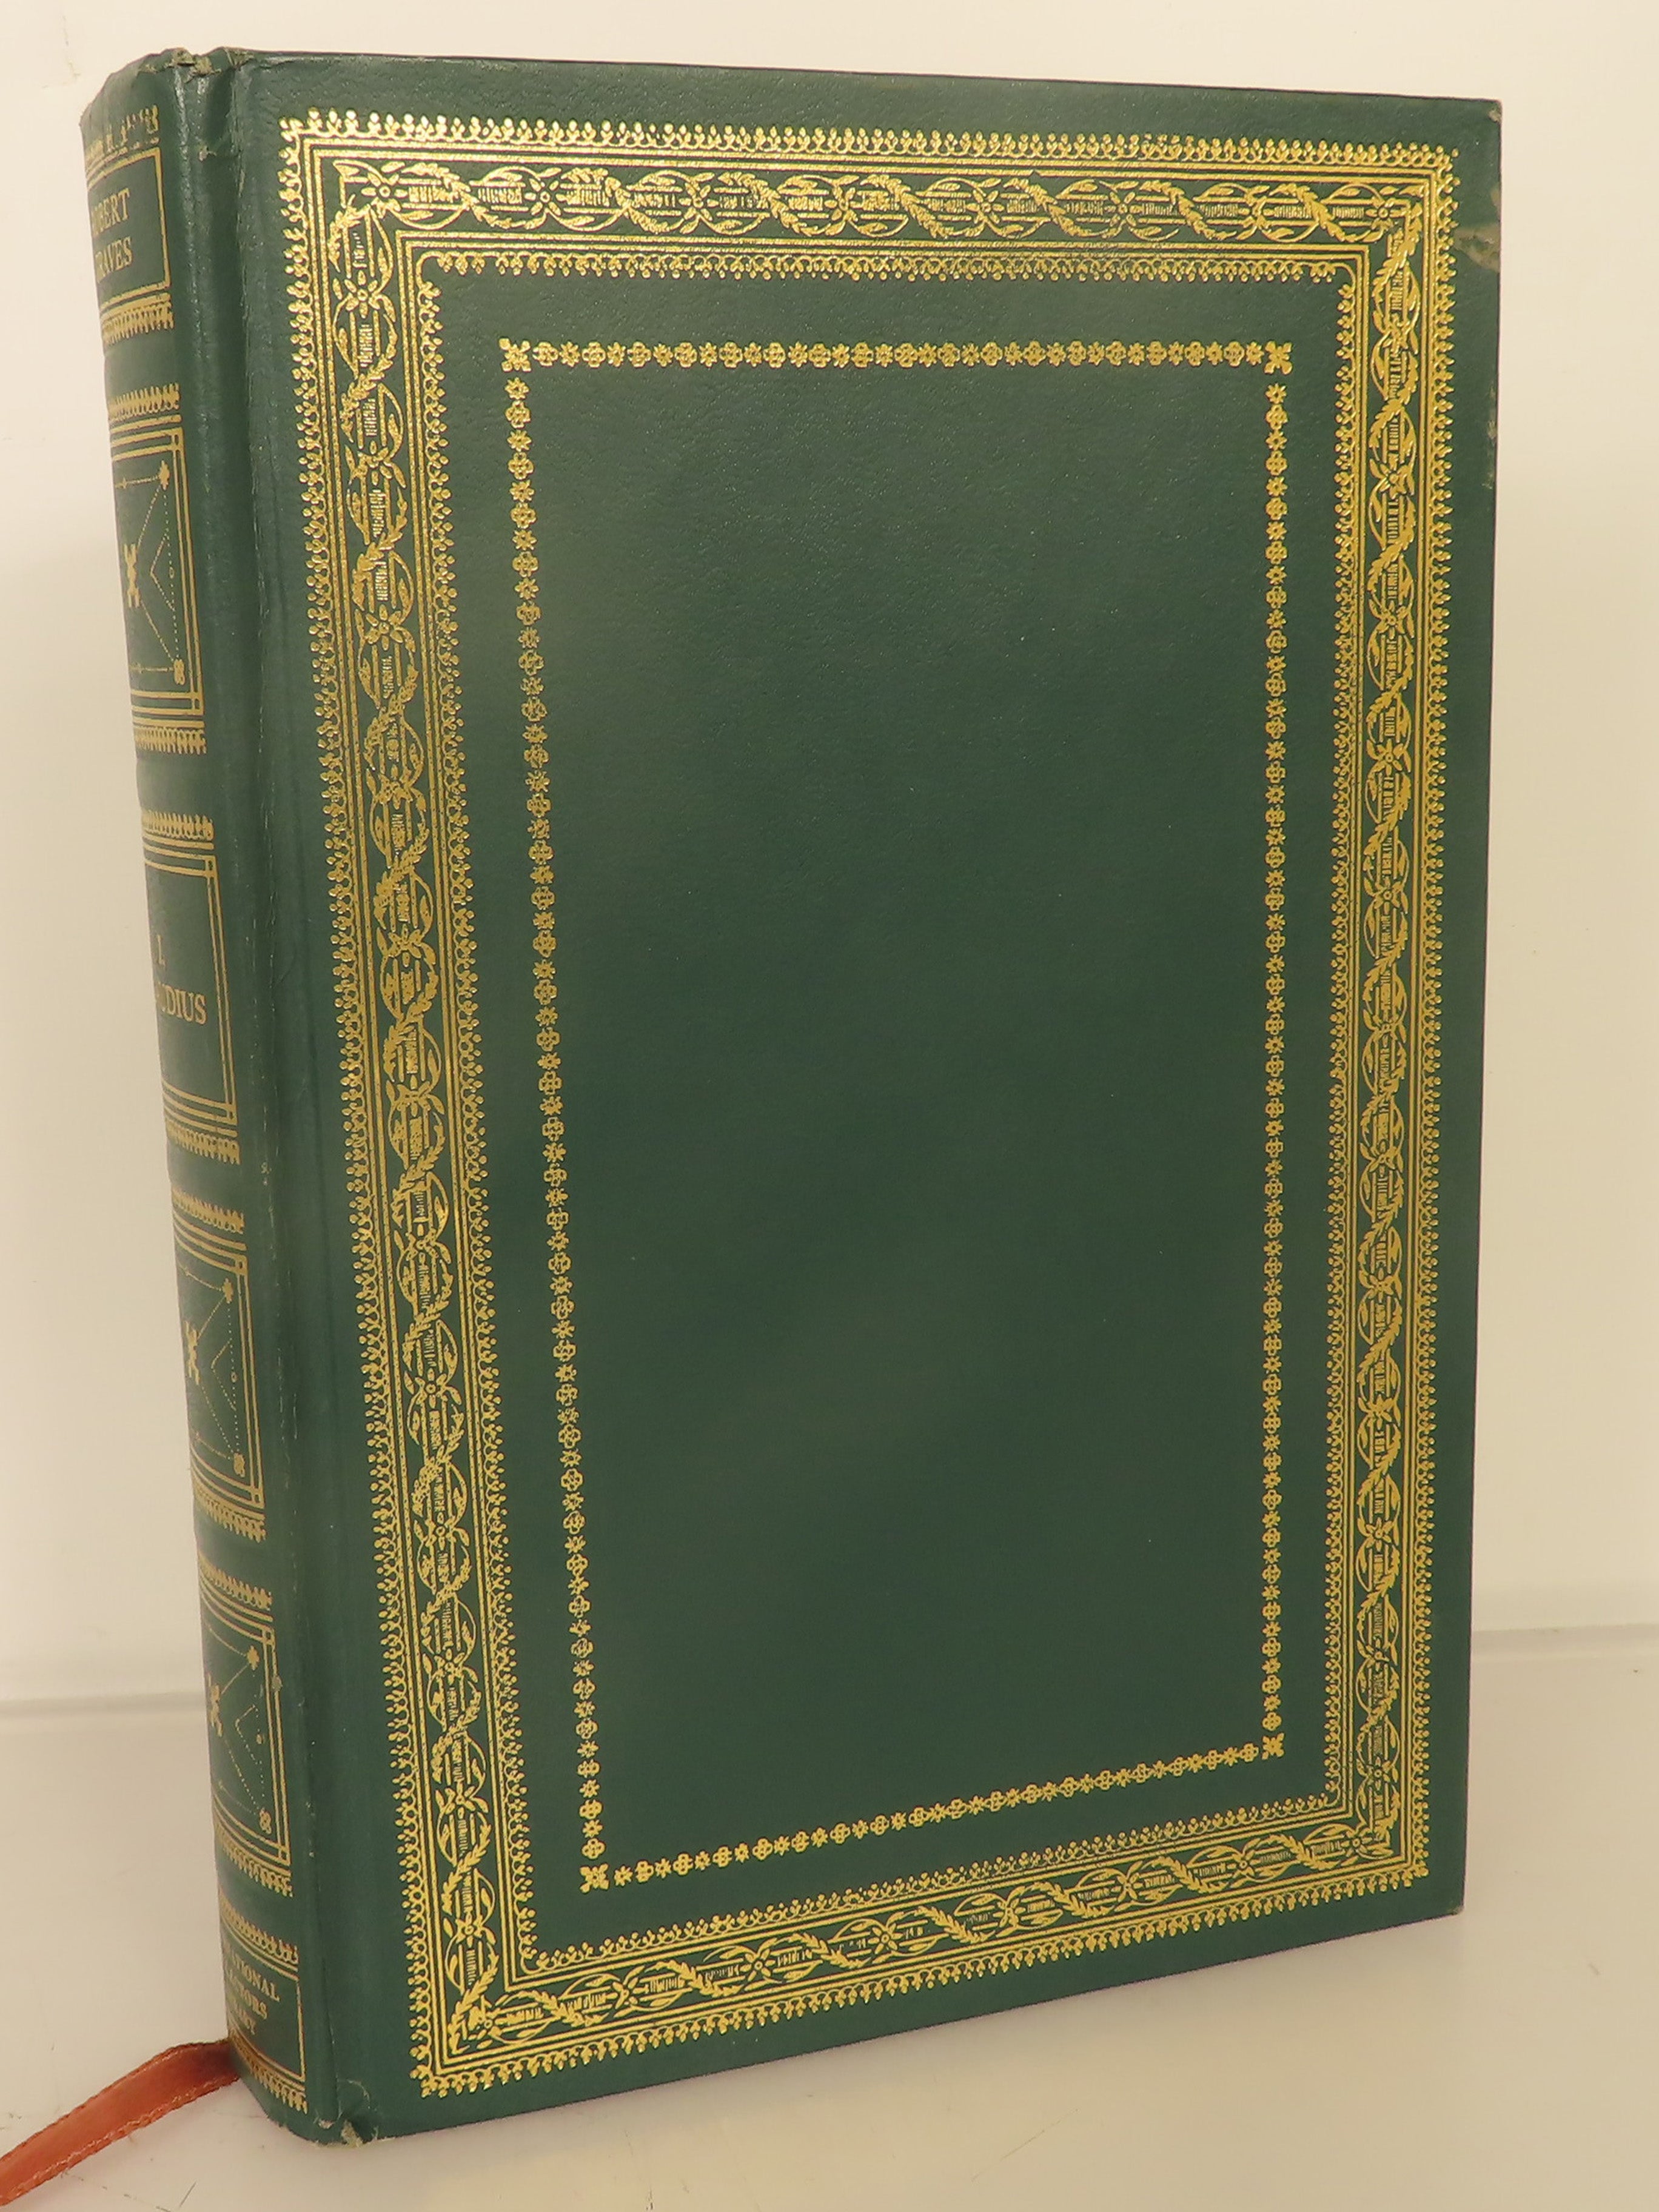 International Collectors Library I, Claudius by Robert Graves 1961